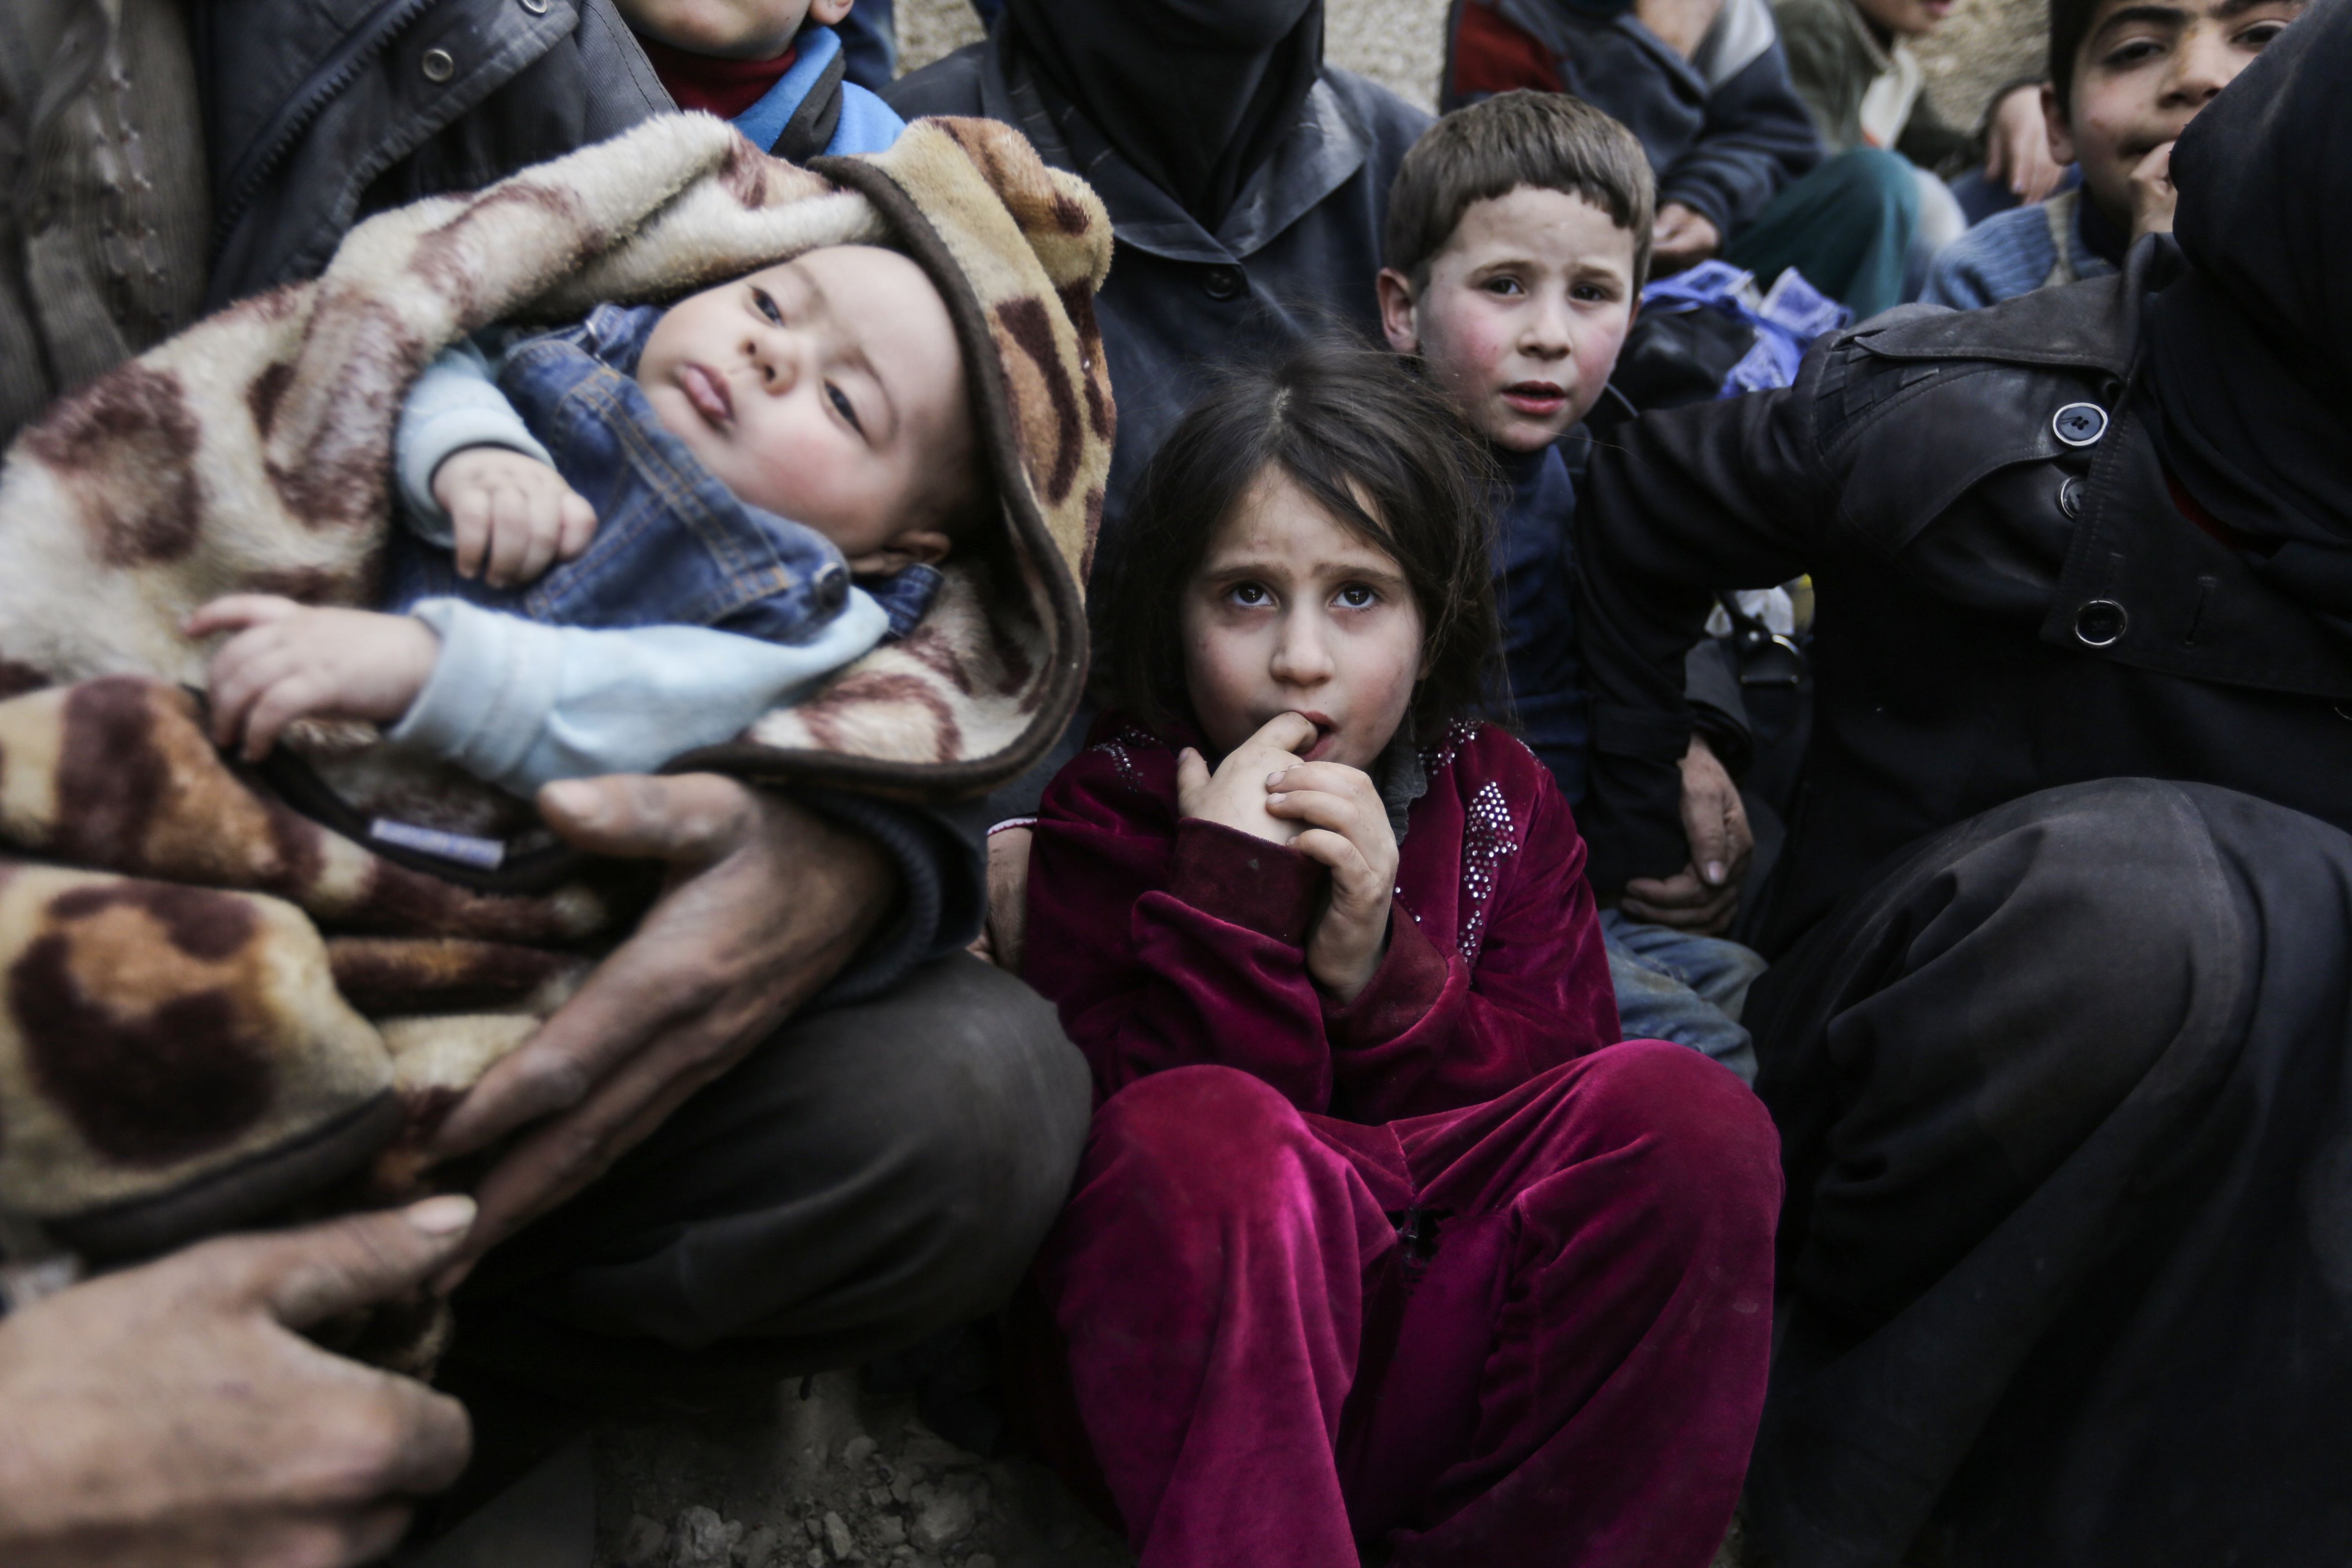 Syrian children sit while awaiting to be evacuated from the Eastern Ghouta enclave in Hawsh al-Ashaari, on March 15, 2018. (Louai Beshara—AFP/Getty Images)